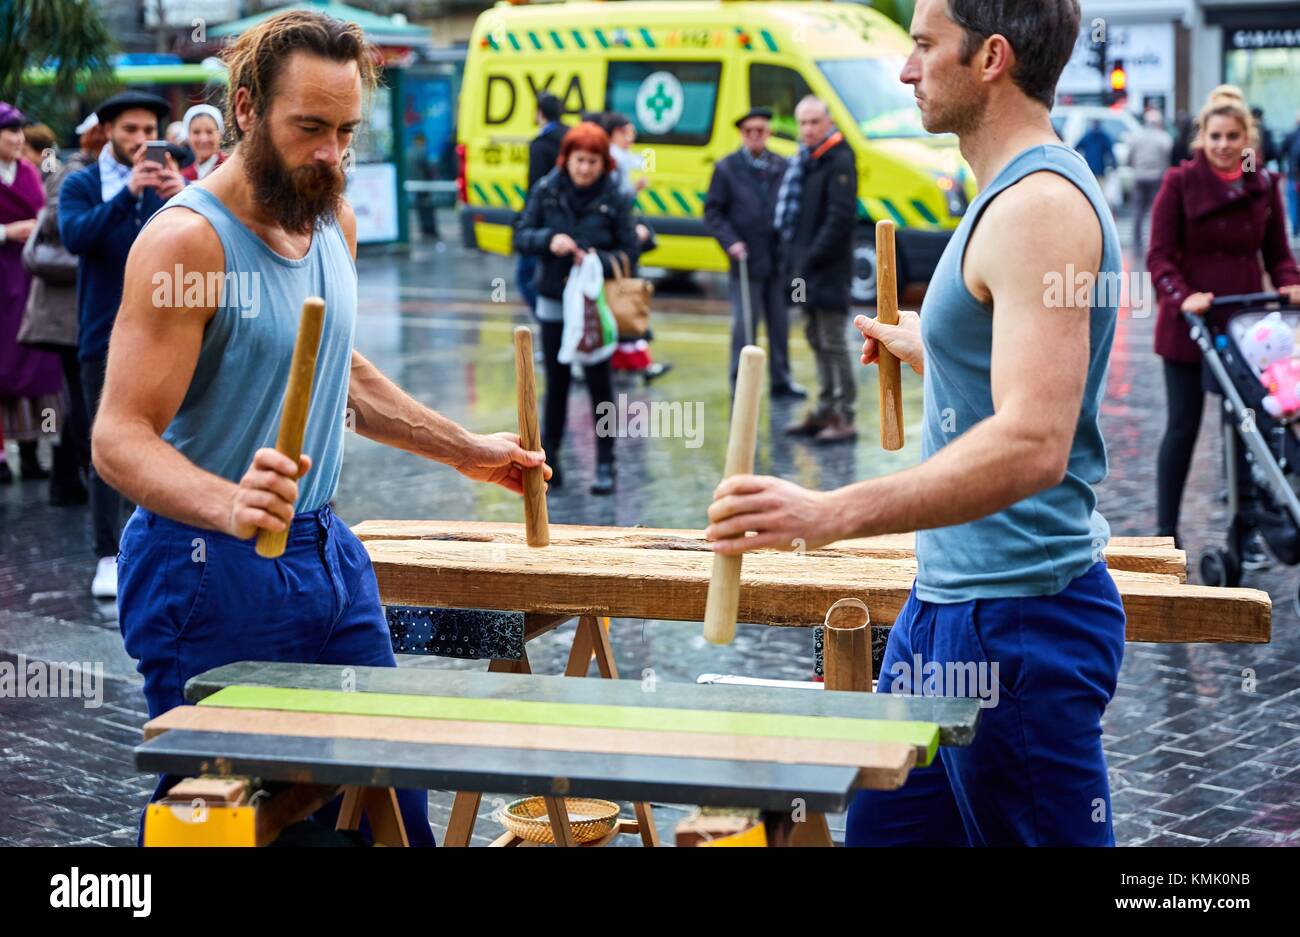 Txalaparta (Basque typical wooden percussion instrument), Feria de Santo Tomás, The feast of St. Thomas takes place on December 21. During this day Stock Photo